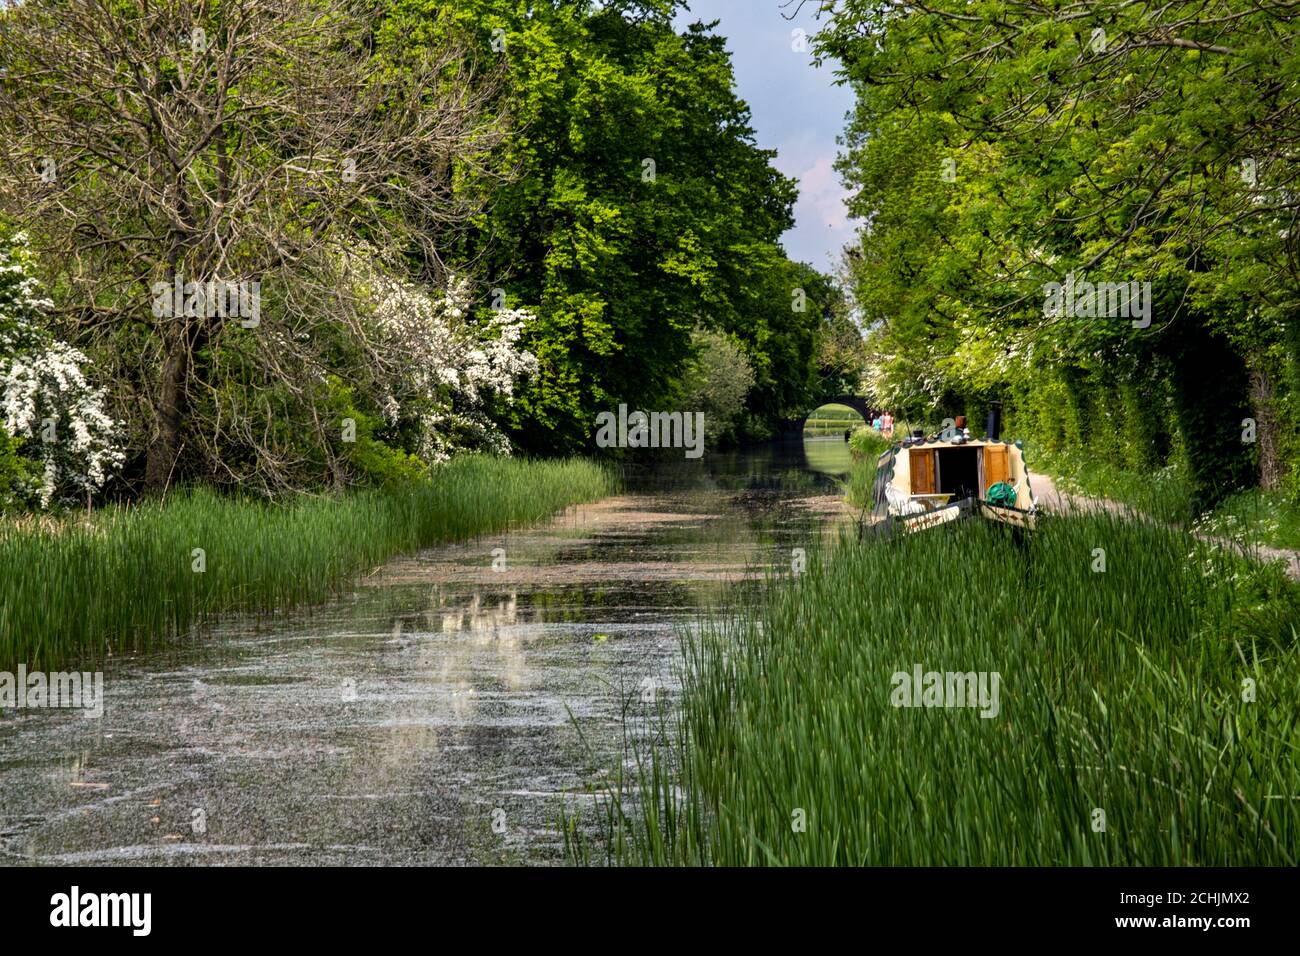 A barge or narrowboat on the Leicester Line of the Grand Union Canal near Foxton Locks, Leicestershire, England, UK Stock Photo